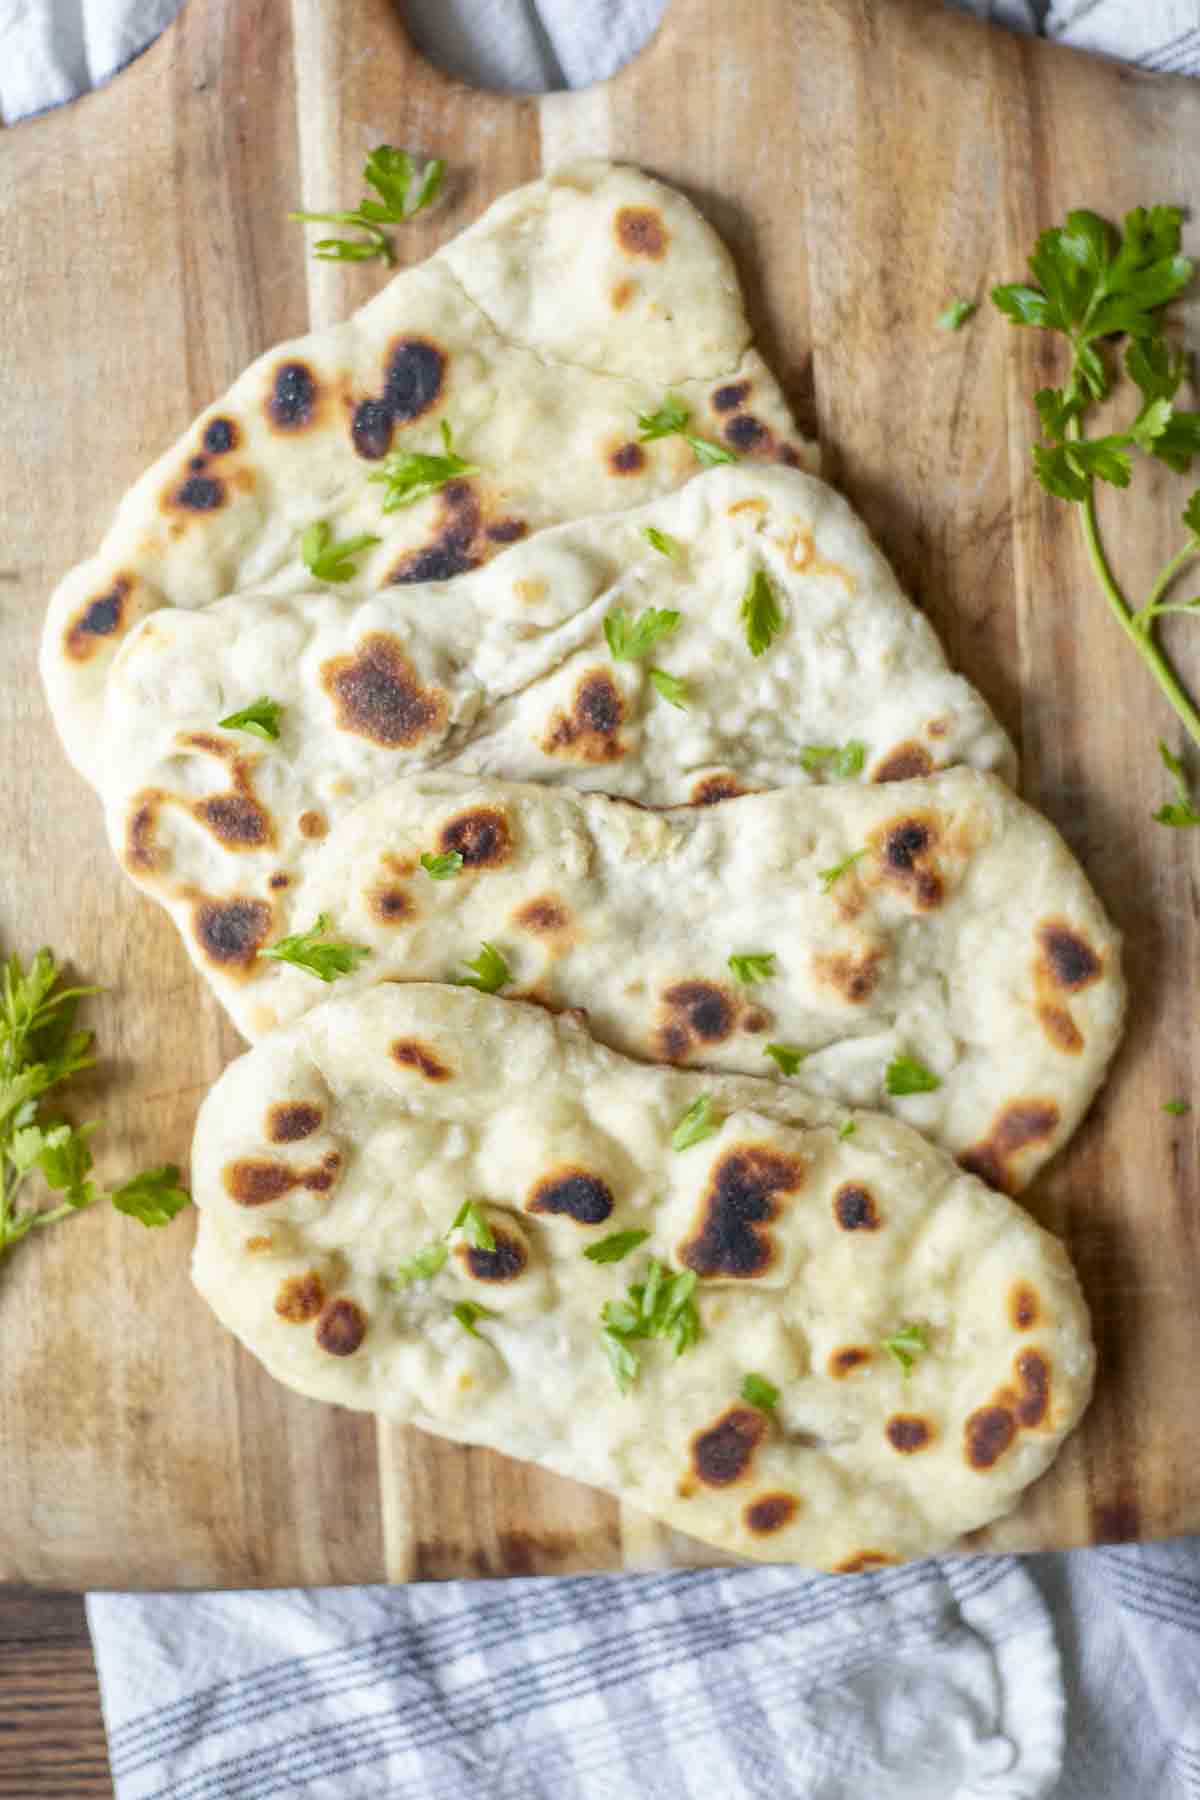 four sourdough flatbreads arranged on a wood cutting board with fresh herbs. The cutting board rests on a blue and white towel